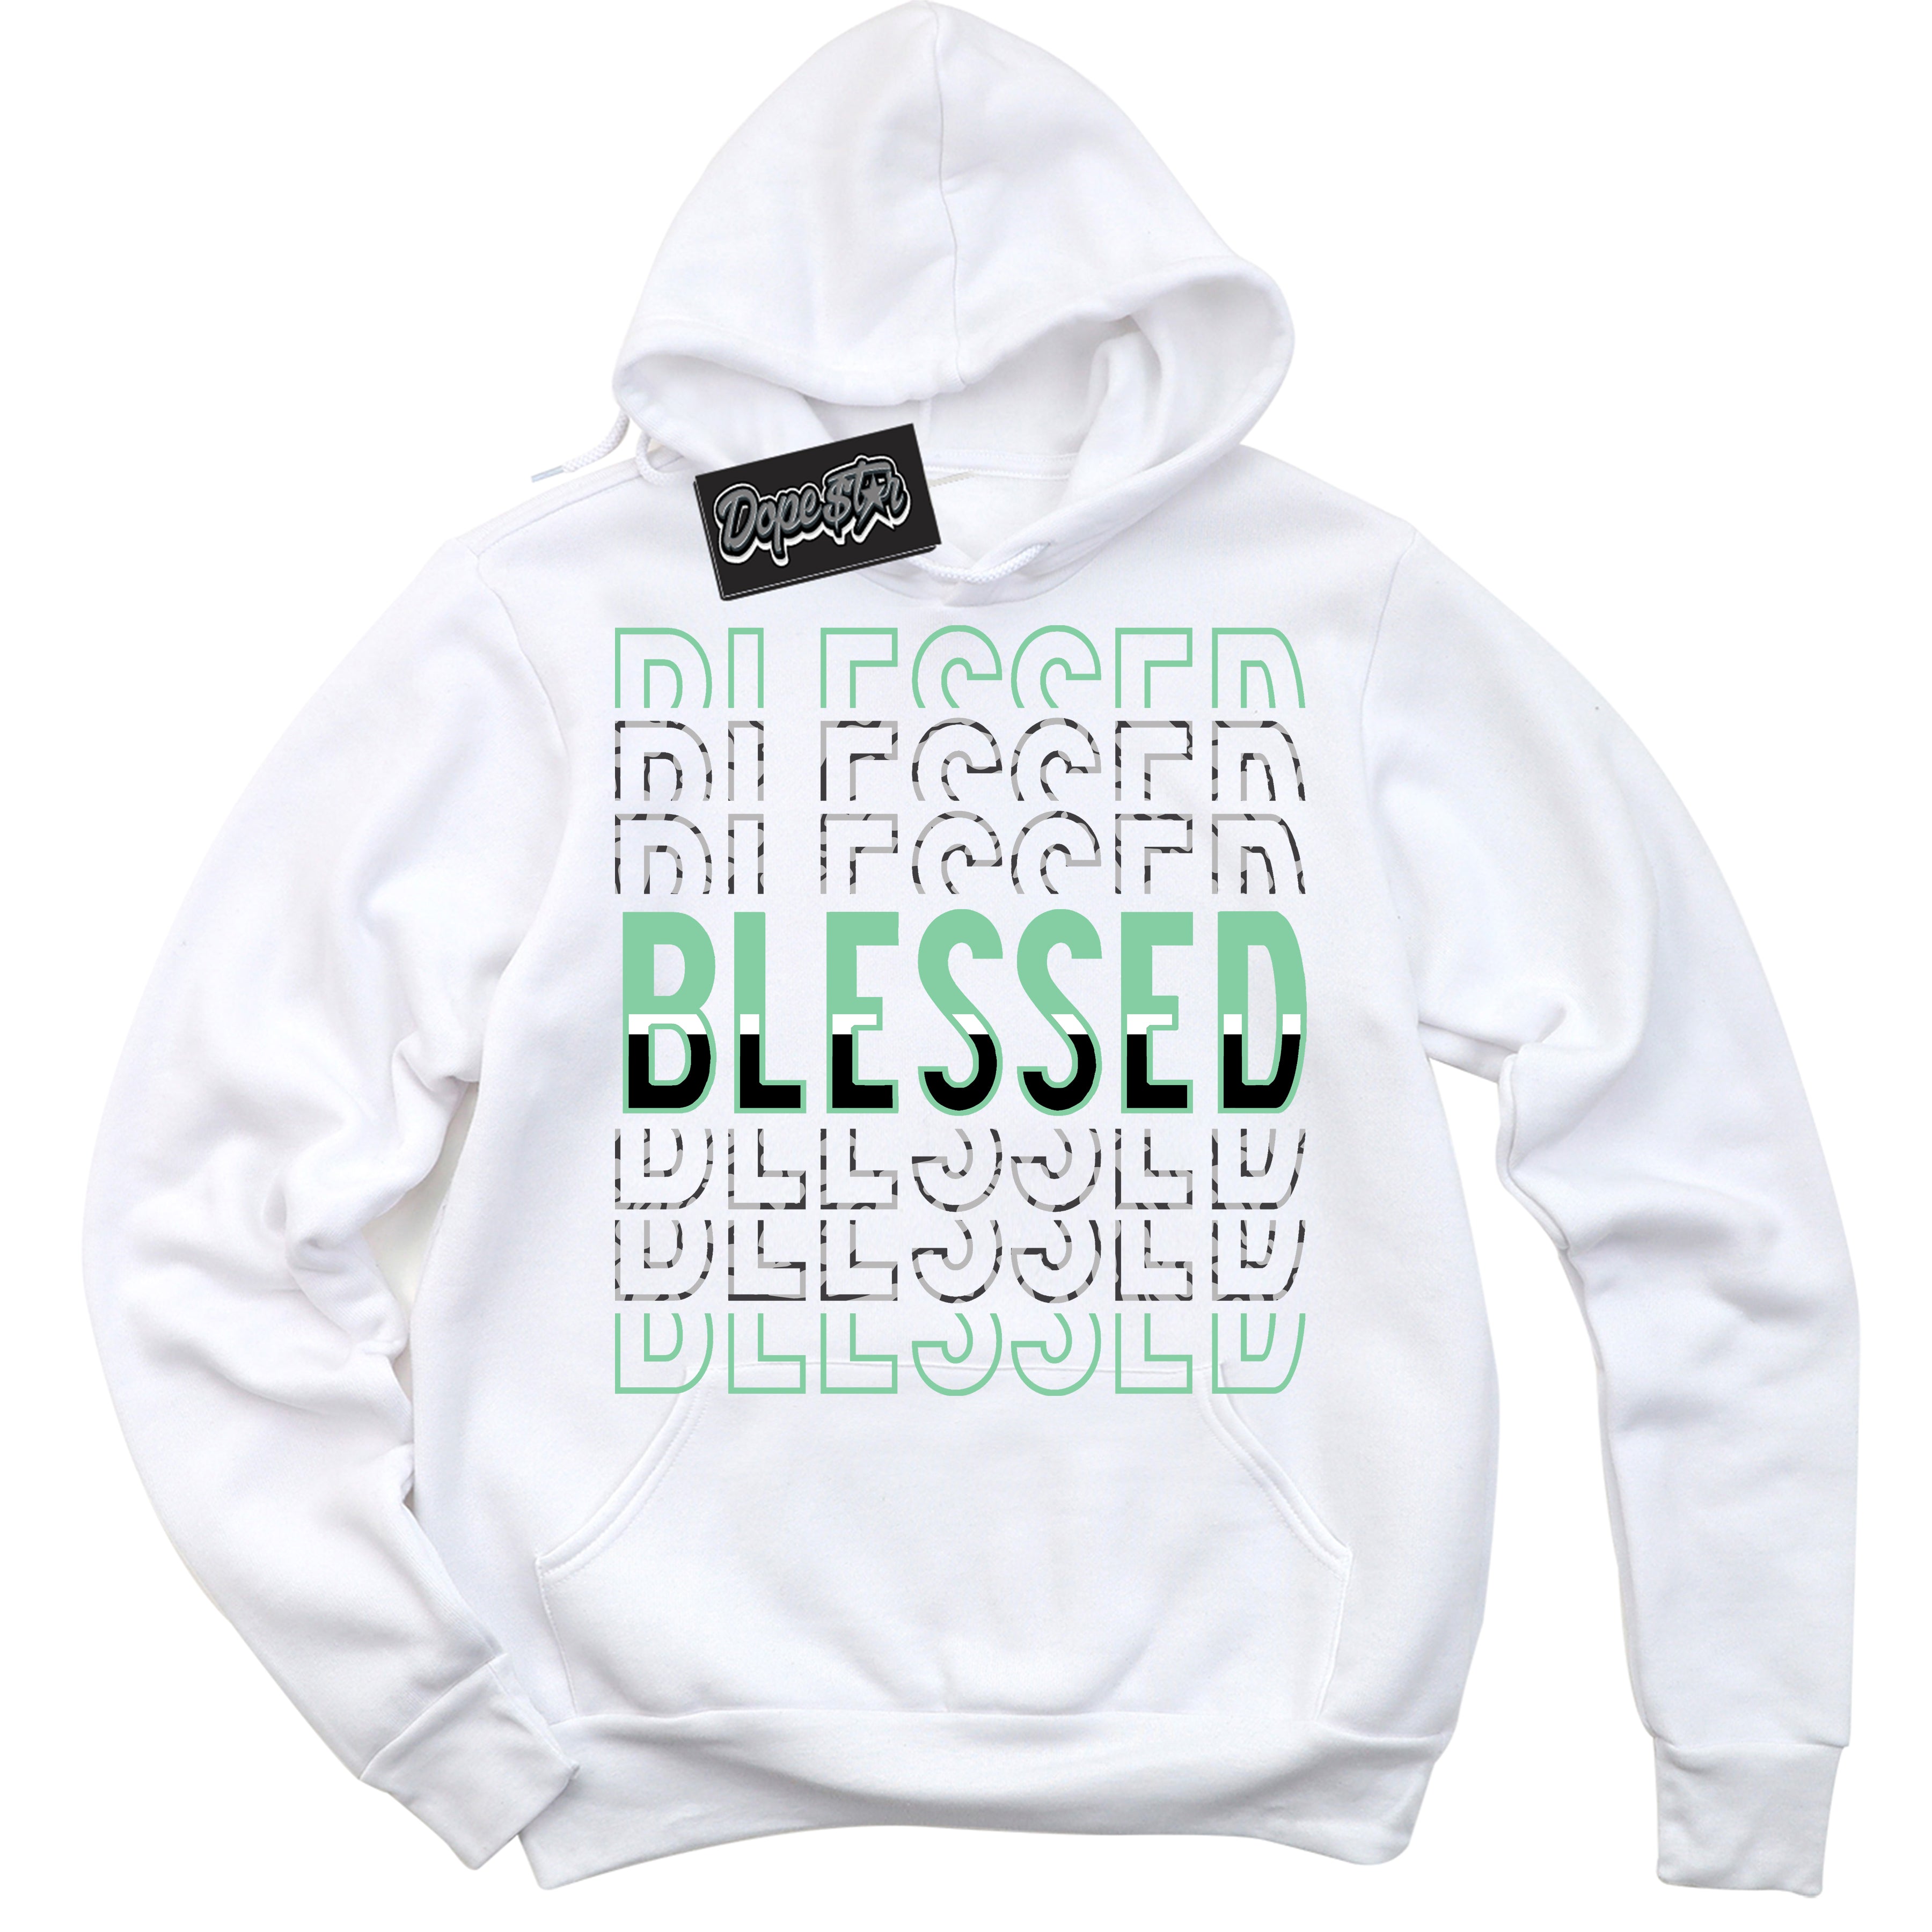 Cool White Graphic DopeStar Hoodie with “ Blessed Stacked “ print, that perfectly matches Green Glow 3s sneakers